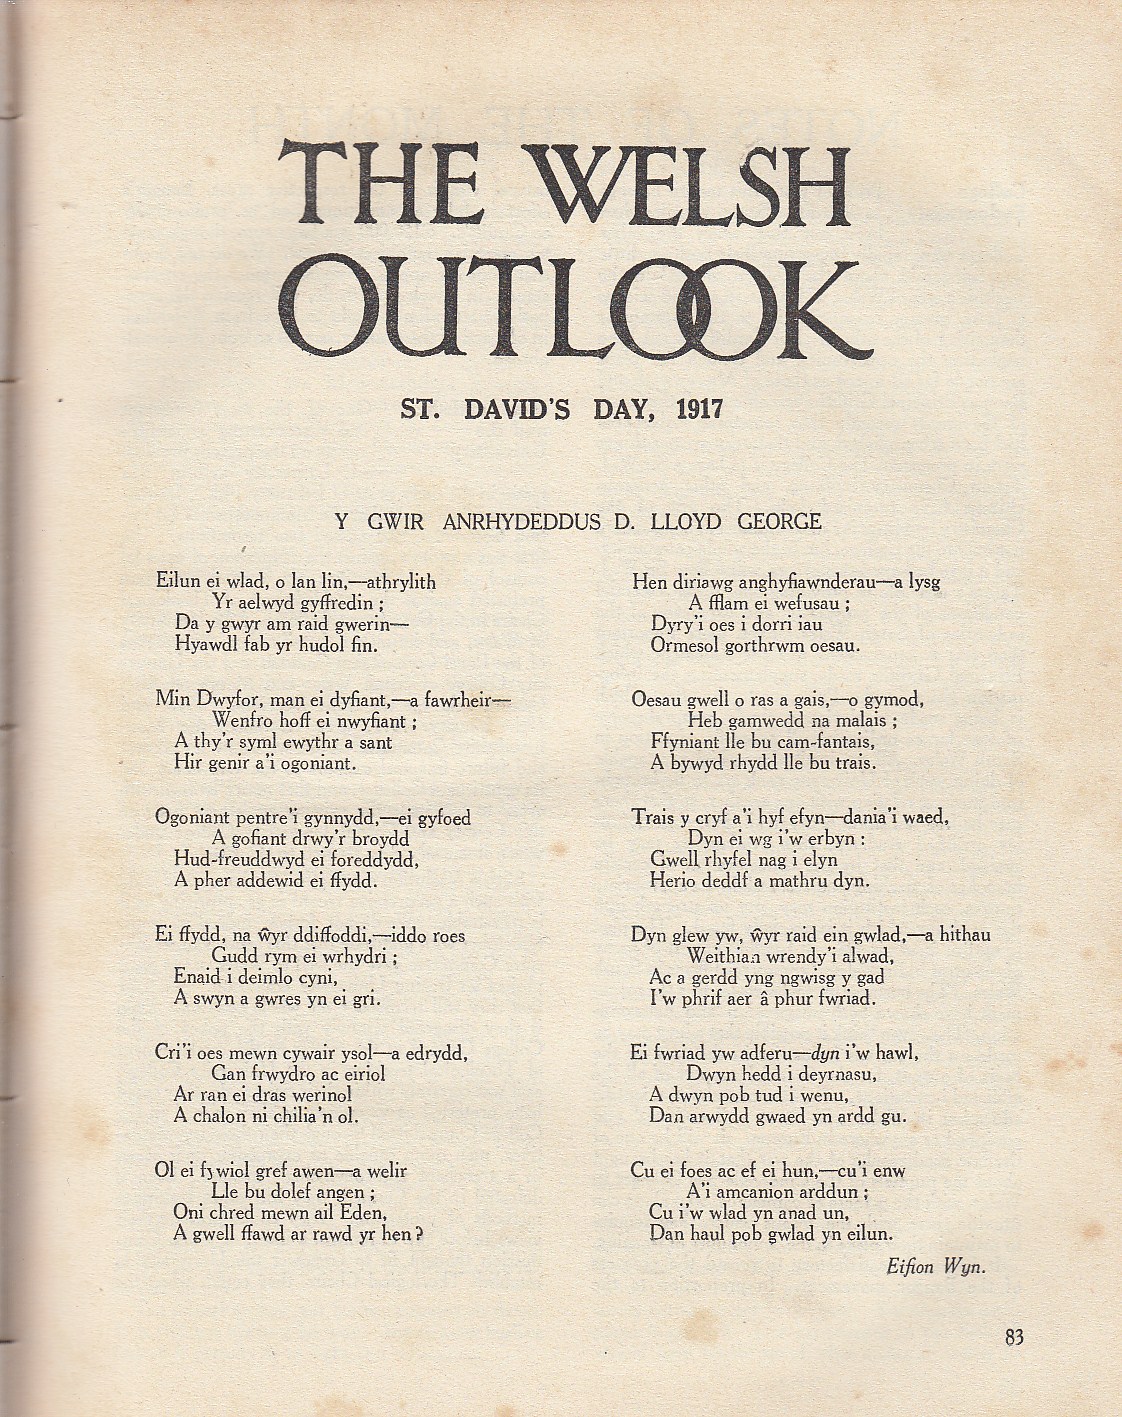 The Welsh Outlook A Monthly Journal Of National Social Progress March 1917 Contains Y Gwir Anrhydeddus D Lloyd George By Eifion Wyn Pant Y Celyn By T Gwynn Jones Thoughts For St